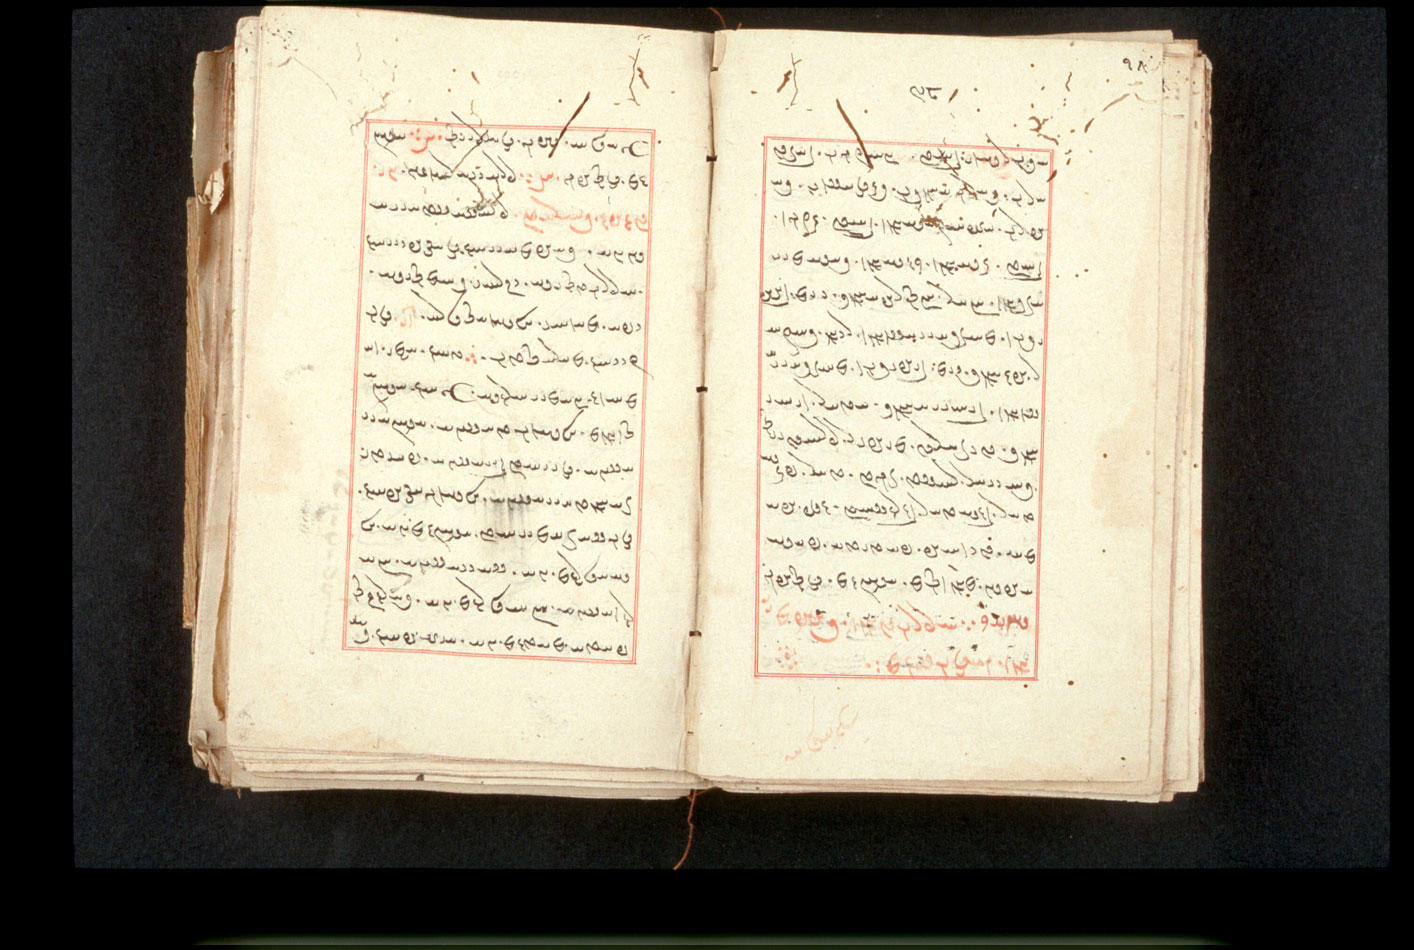 Folios 98v (right) and 99r (left)